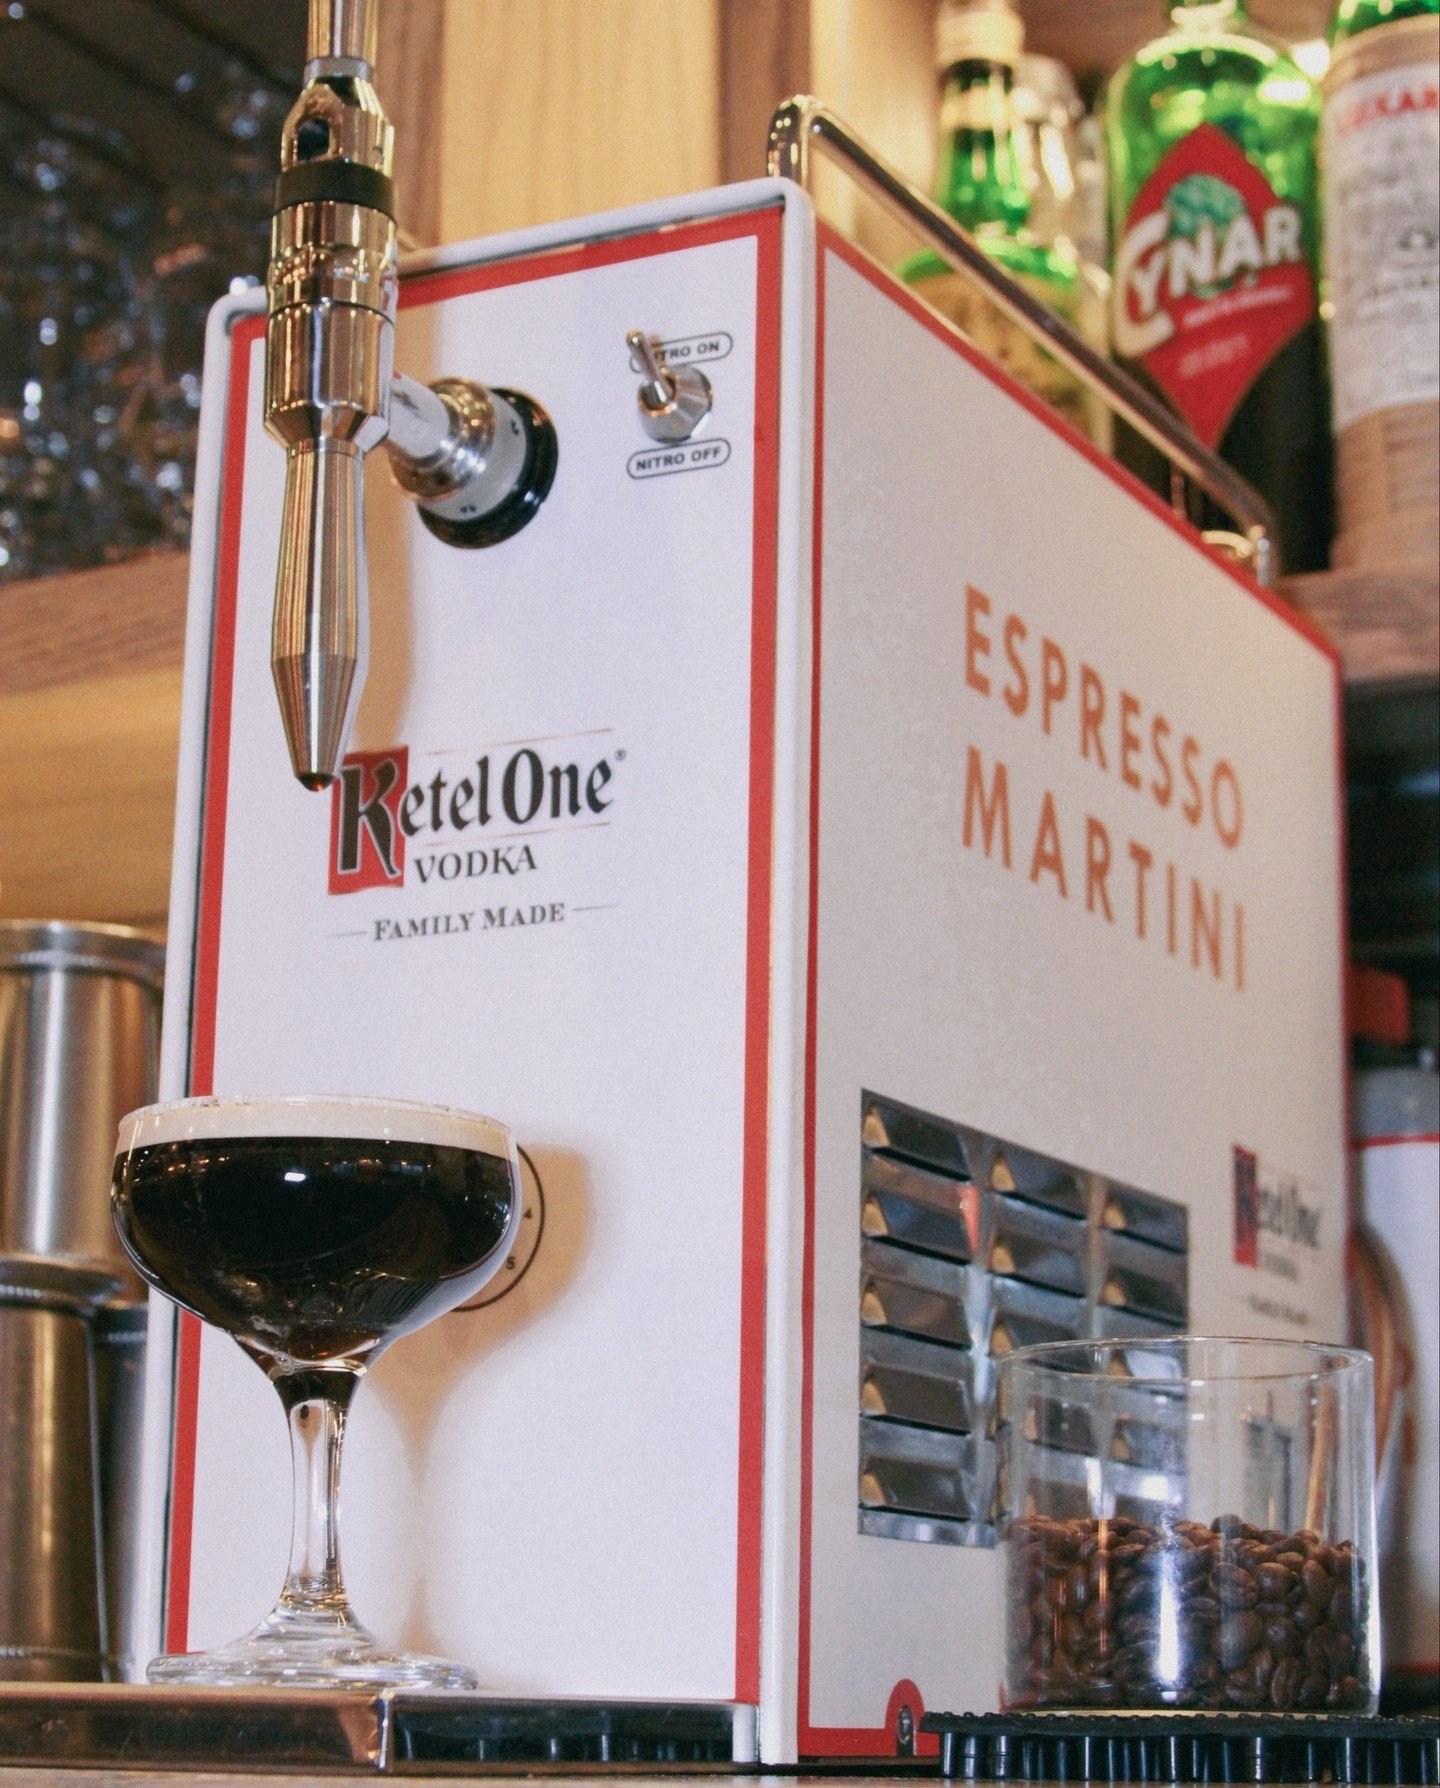 Rainy days call for a little pick-me-up! ☔☕ Our Espresso Martini machine is here to add a touch of pep to your day. Shake off the rain and sip on some liquid sunshine!